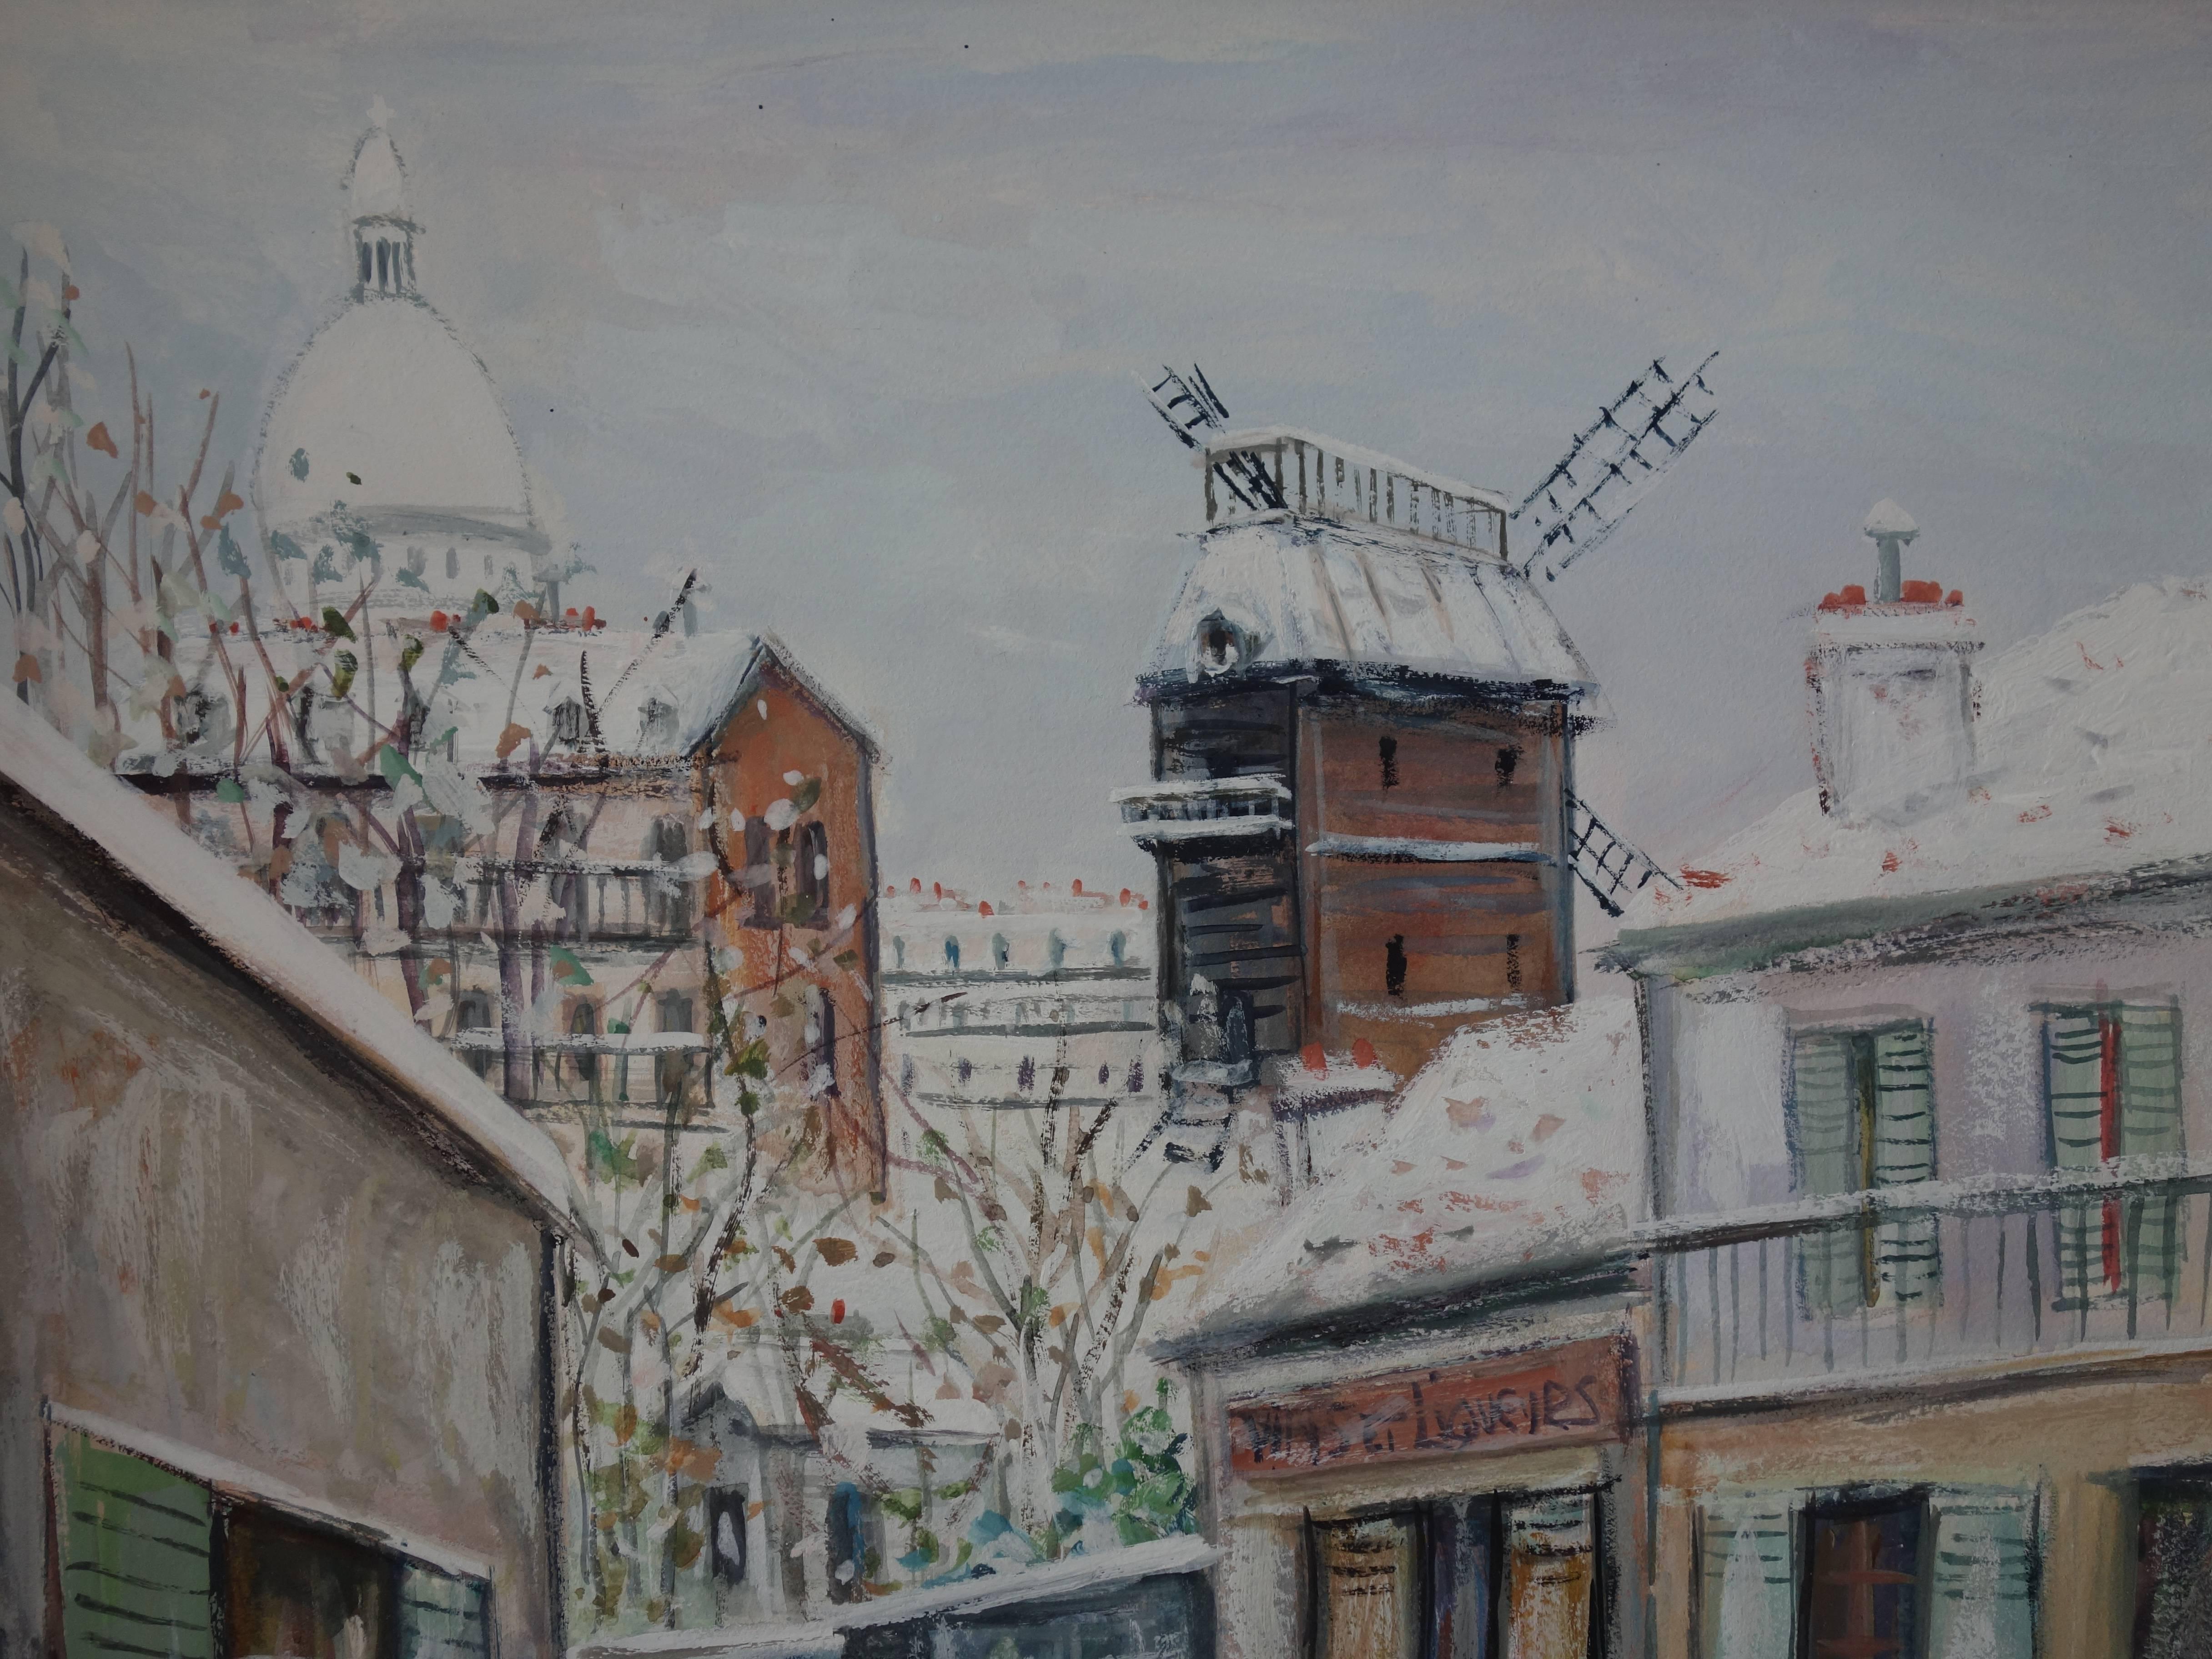 Paris : Winter Day at Montmartre - Original signed gouache painting - Cerificate - Gray Landscape Painting by Maurice Utrillo